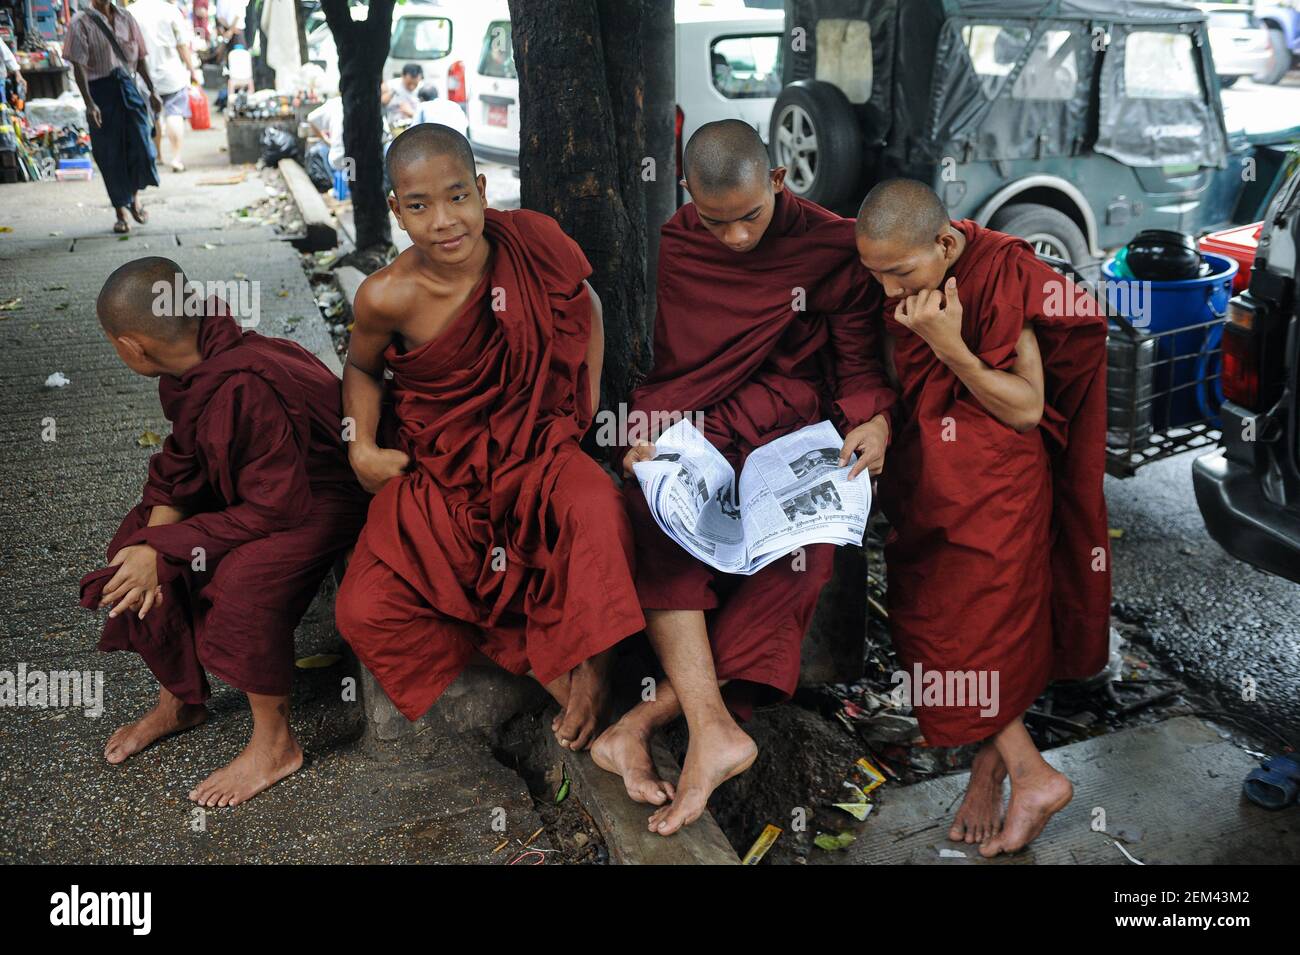 27.07.2013, Yangon, Myanmar, Asia - A group of Buddhist monks in their saffron robes read a newspaper in downtown Yangon, the former capital city. Stock Photo